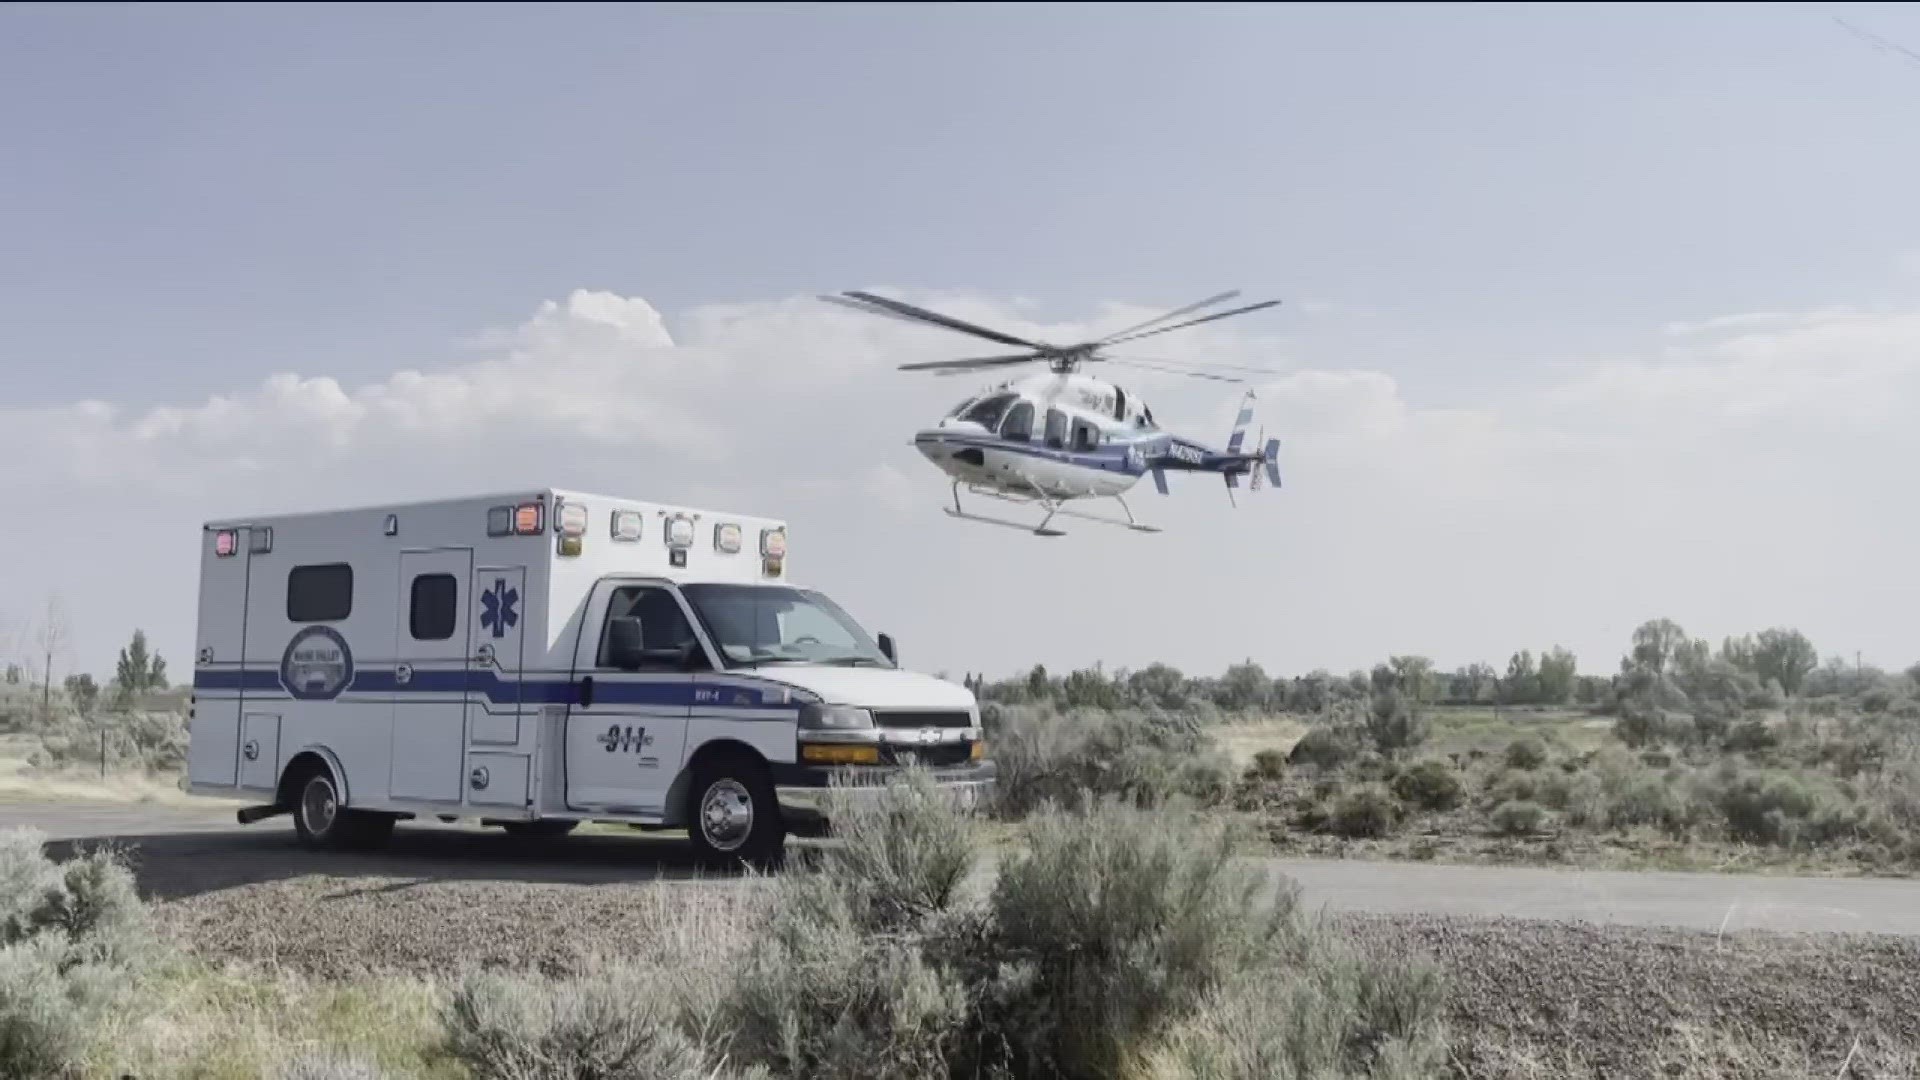 Air St. Luke's EMS Manager, Chris Shandera, joins KTVB on the News at 4 to discuss what this week for the local and EMS community.